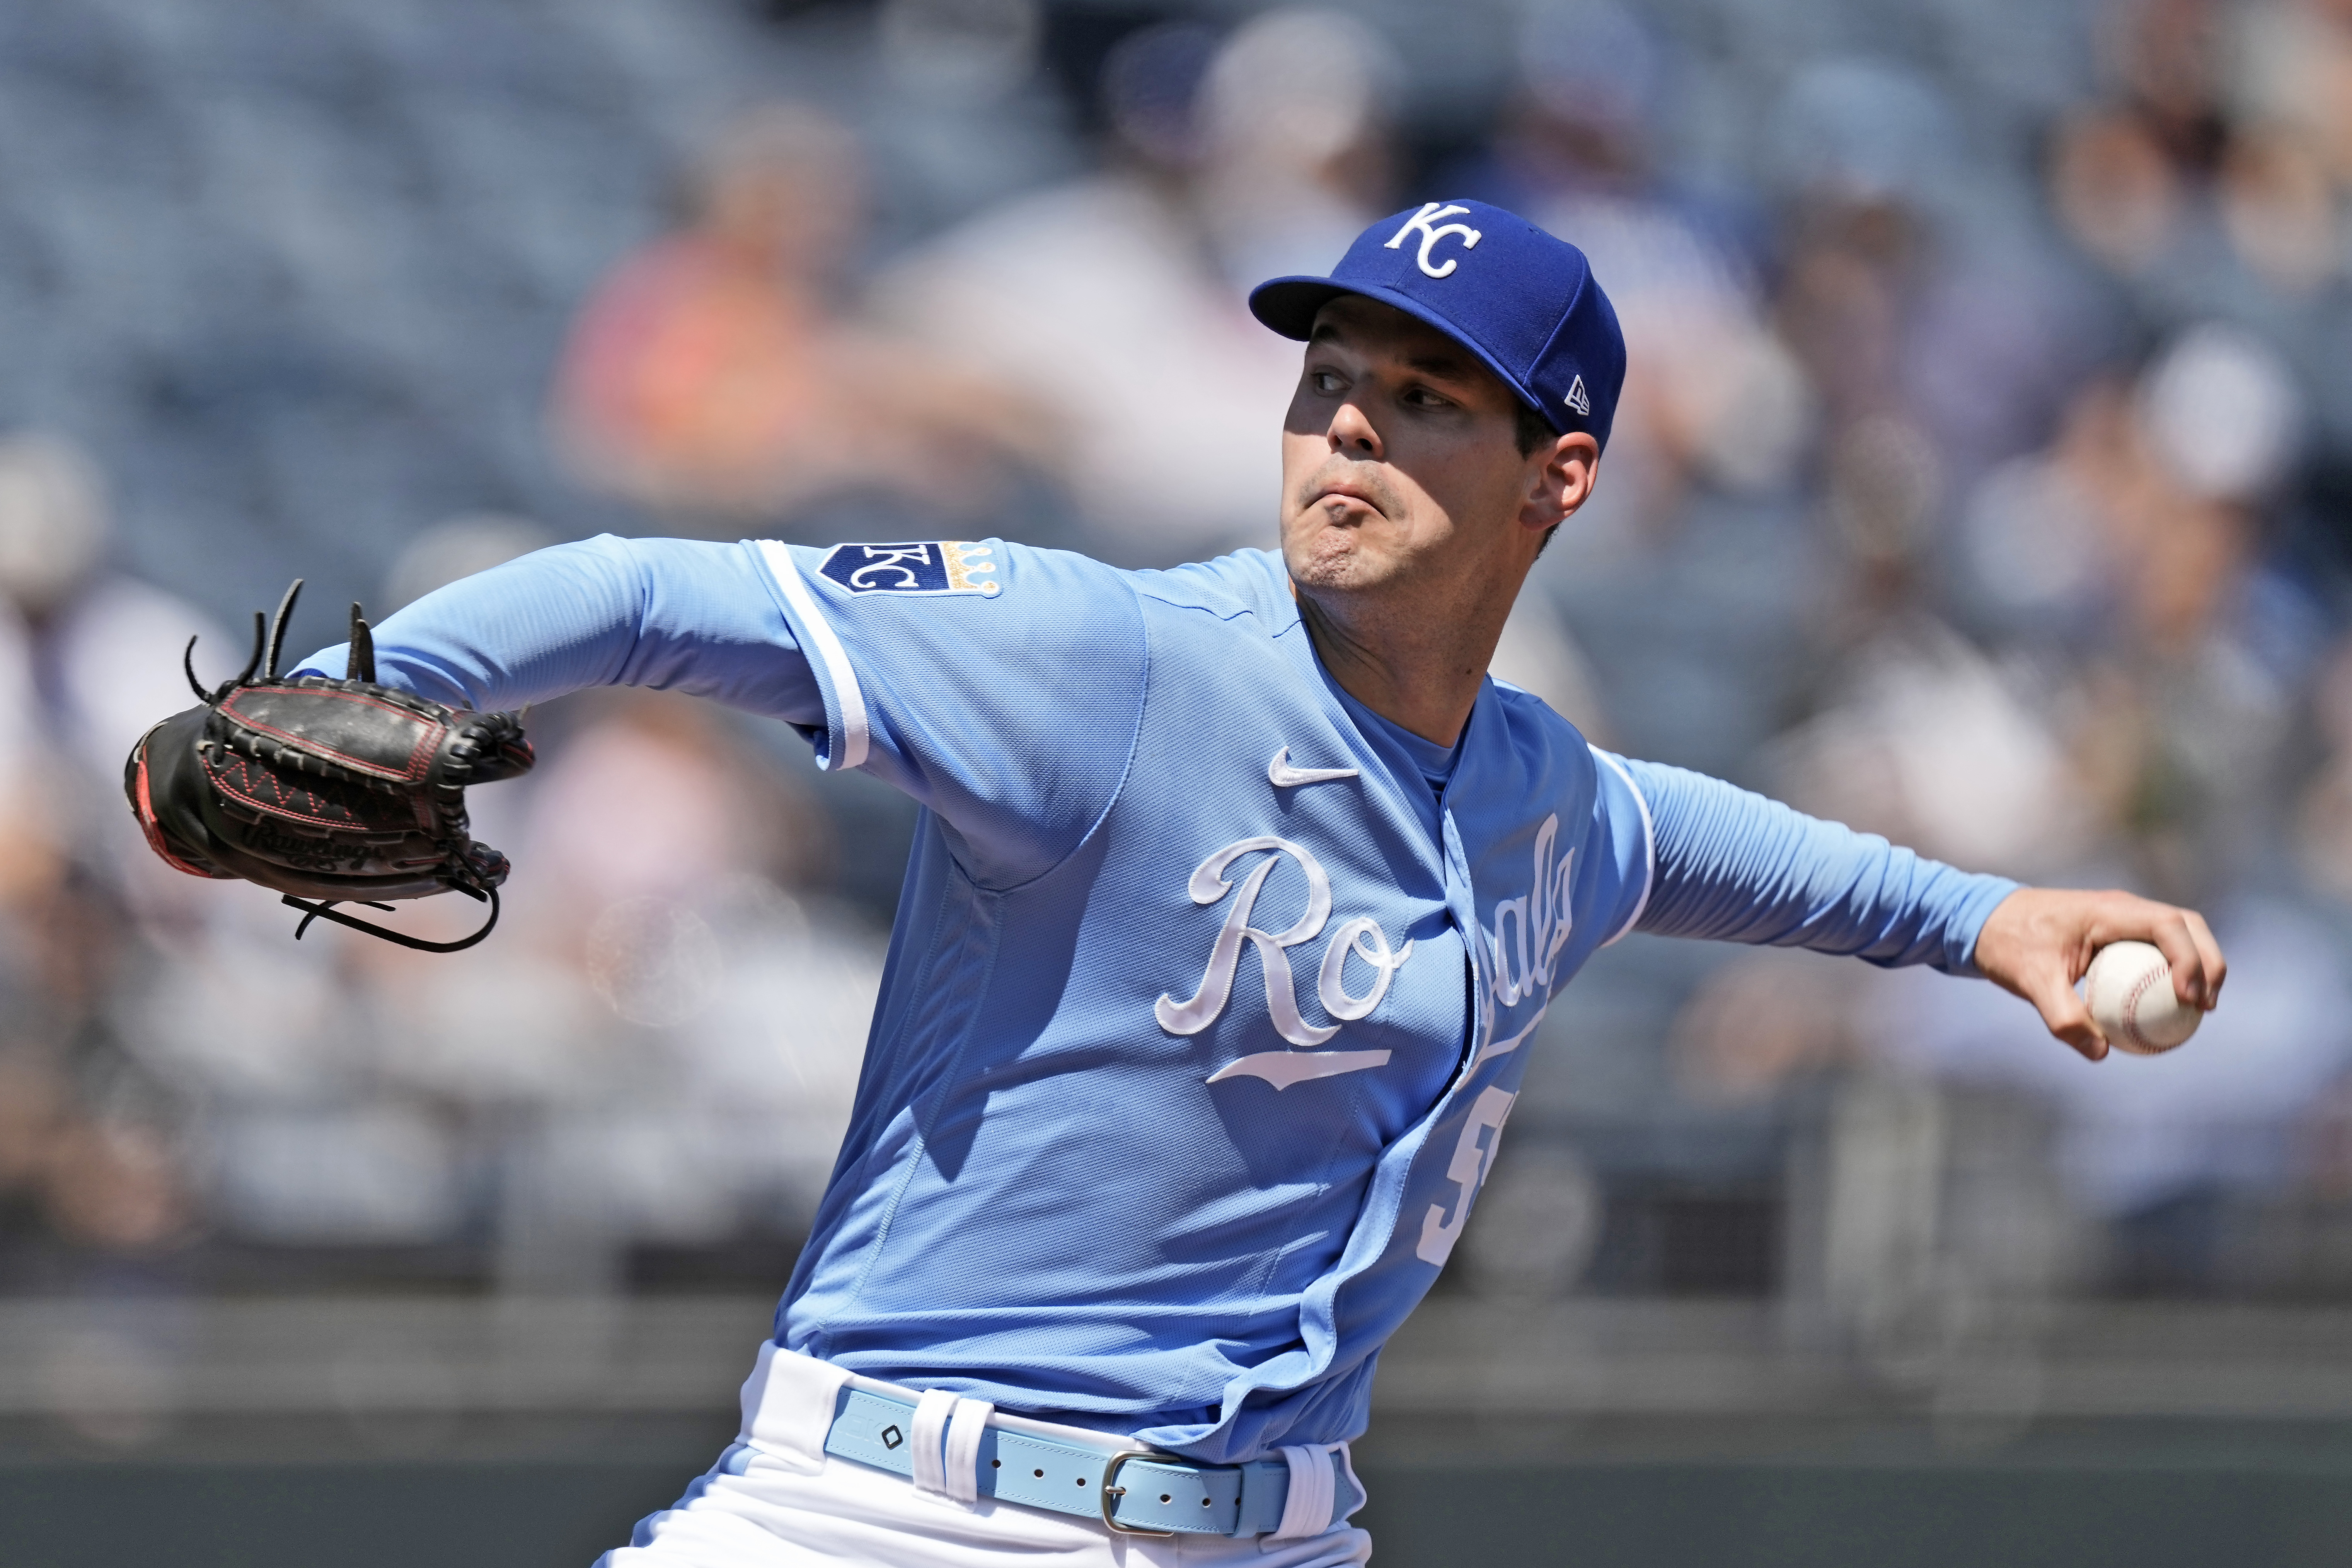 Cole Ragans continues to dominate as Royals take opener over White Sox